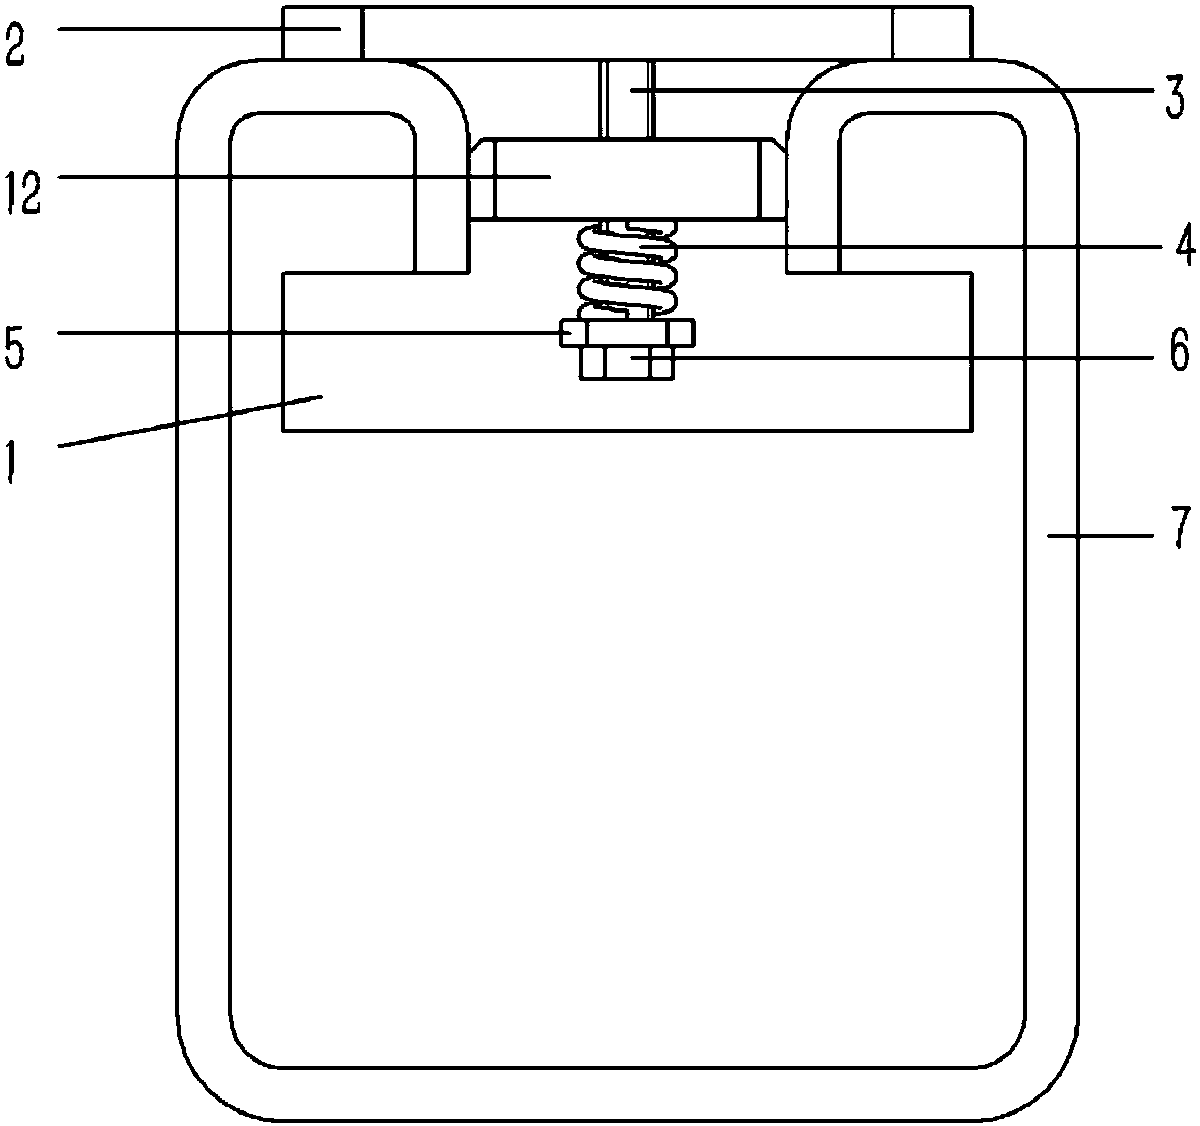 A connector for photovoltaic modules